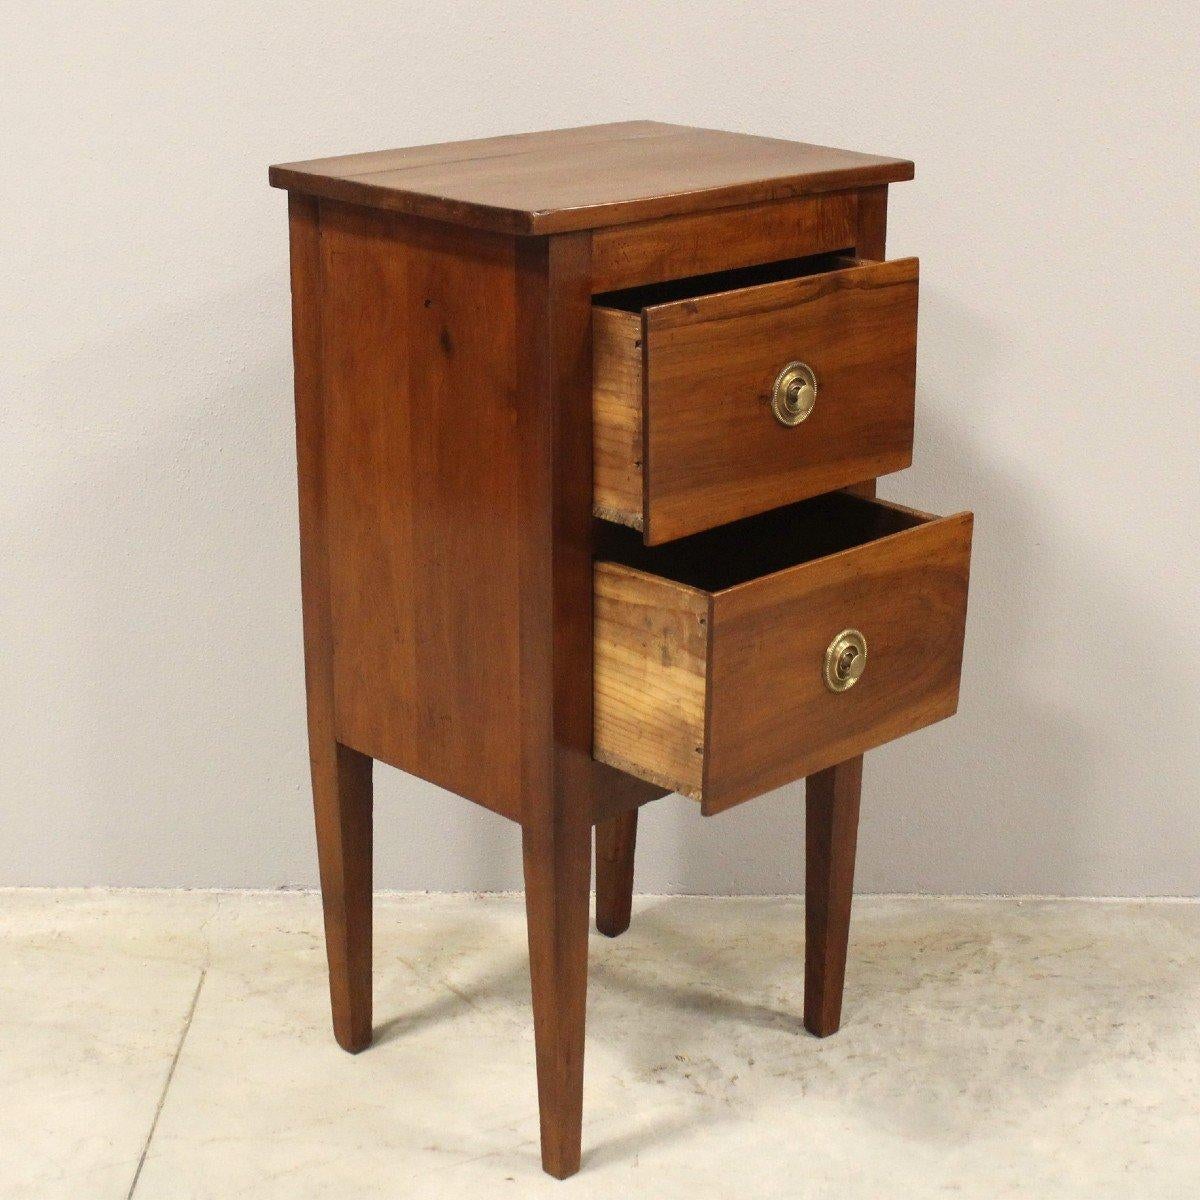 18th Century Italian Walnut Bedside Table with Two Drawers and Tapered Legs 2